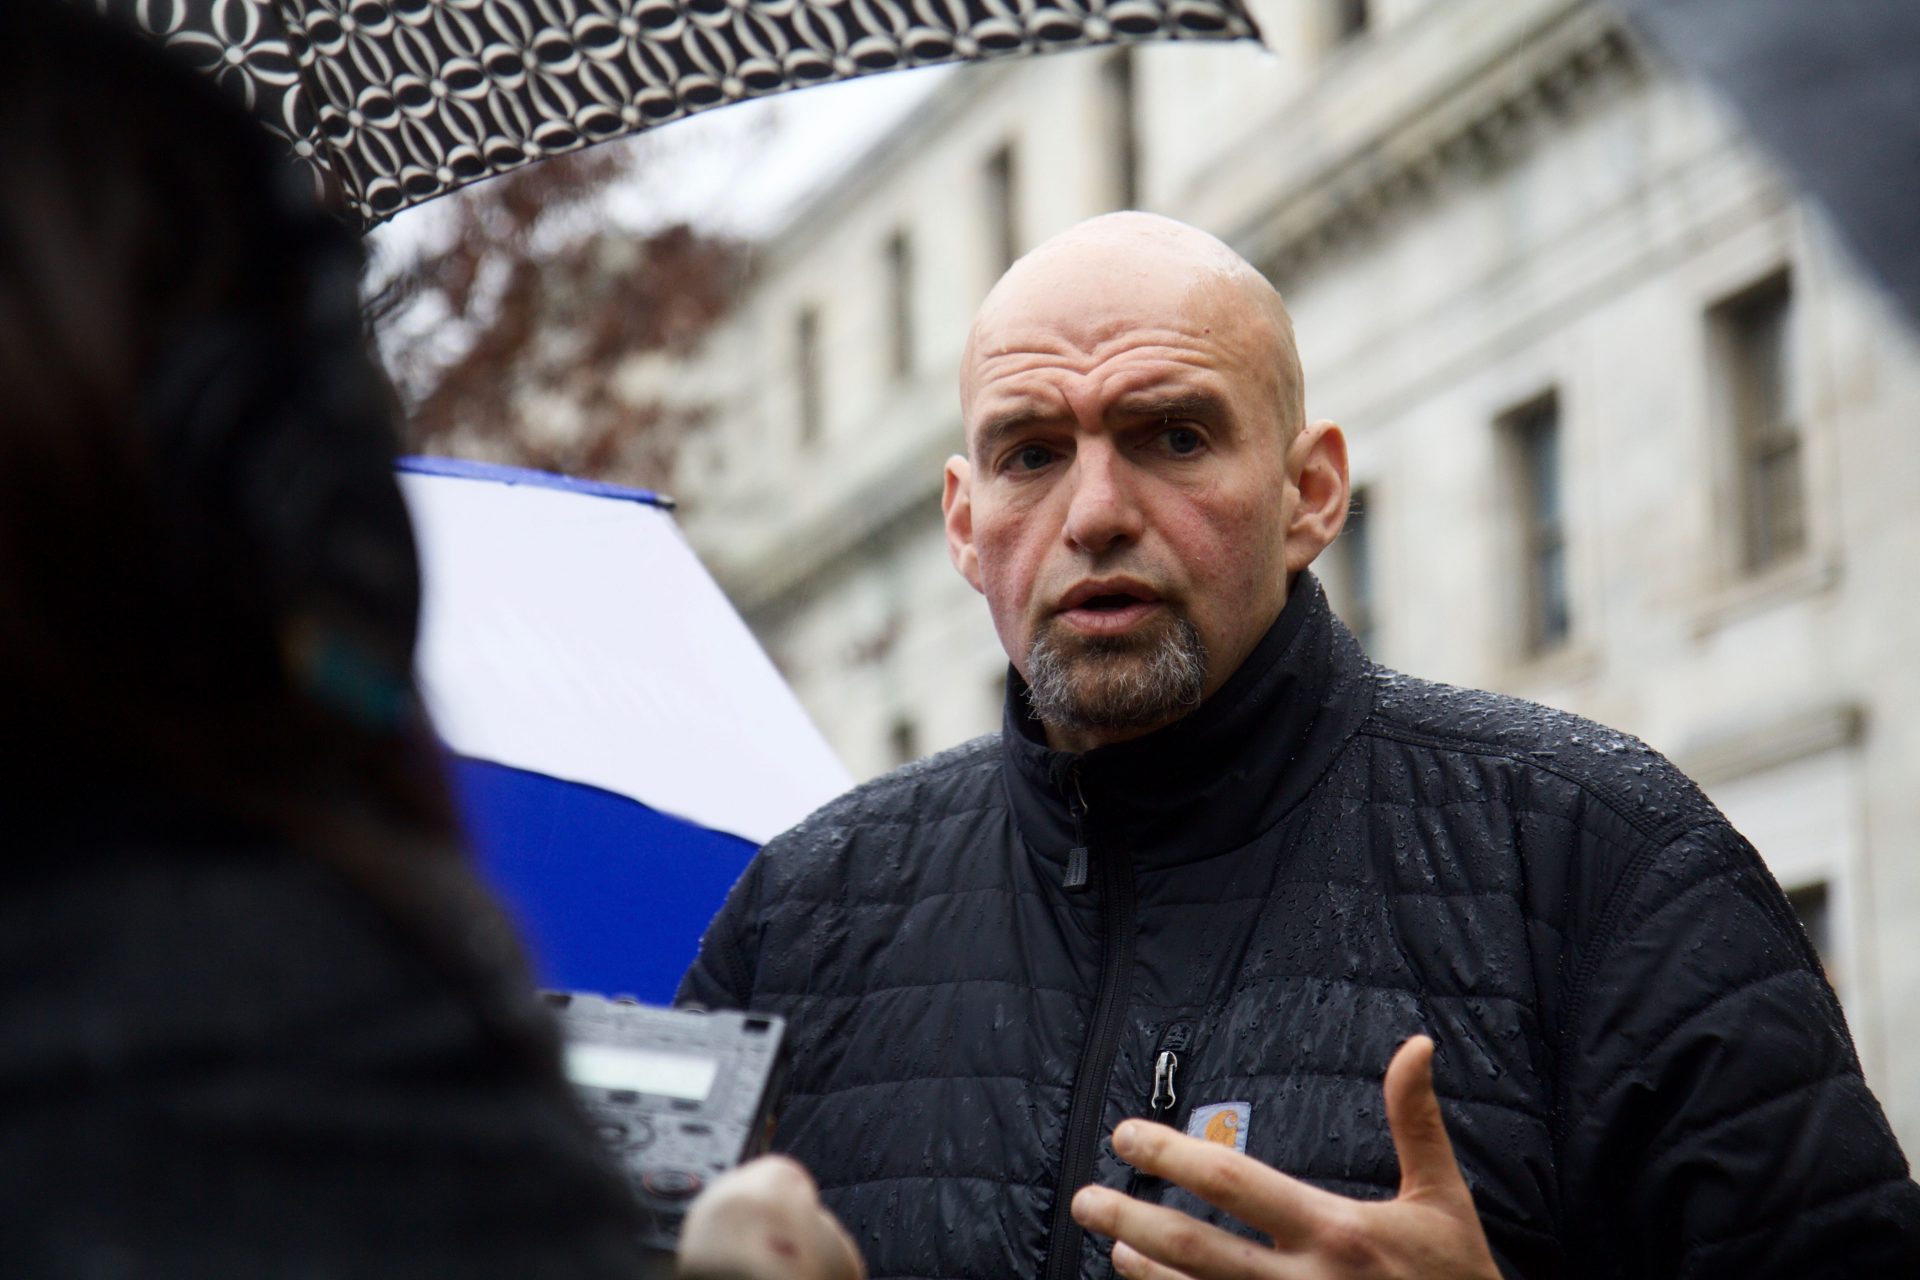 Pa. Lieutenant Governor John Fetterman speaks to the press after Sheppard’s hearing.